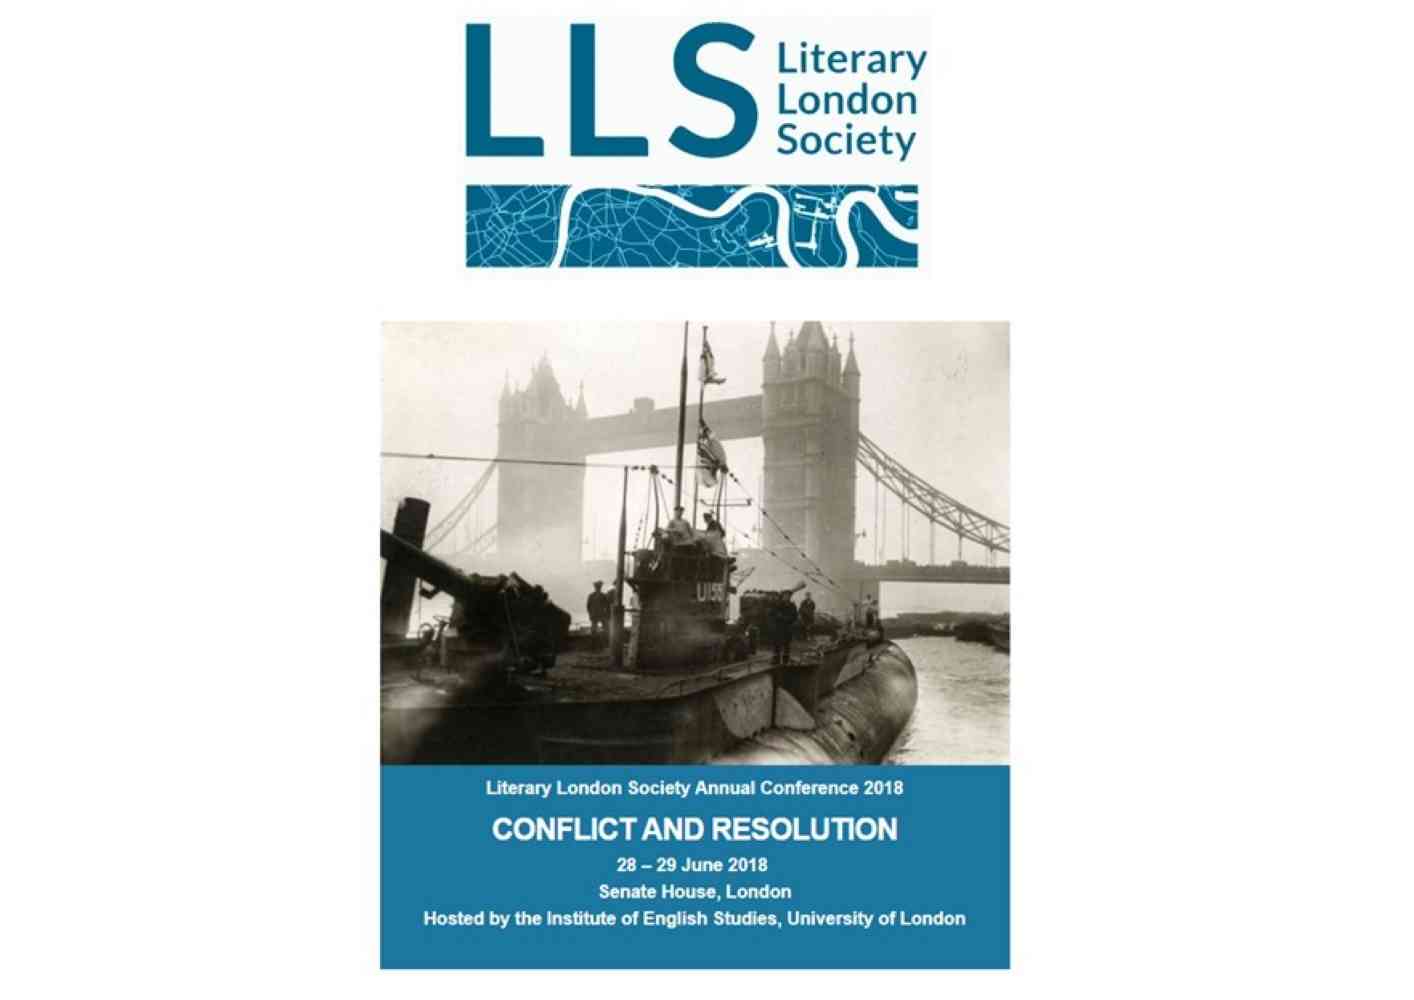 The Literary London Society Annual Conference 2018 - The most recent international conference I have organised was for the Literary London Society. The conference took the theme of 'Conflict and Resolution', with 2018 marking the centenary year of the end of the First World War and the start of female suffrage in the United Kingdom, and a half century since 1968, a year of social and political convulsions across the globe. Plenary talks included Prof Max Saunders (KCL), ‘London, the First World War, and the Future in the To-Day and To-Morrow Book Series'; panels examined themes from 'Mobilising bodies on the home front' to 'Conflict and cohabitation in multicultural London'.